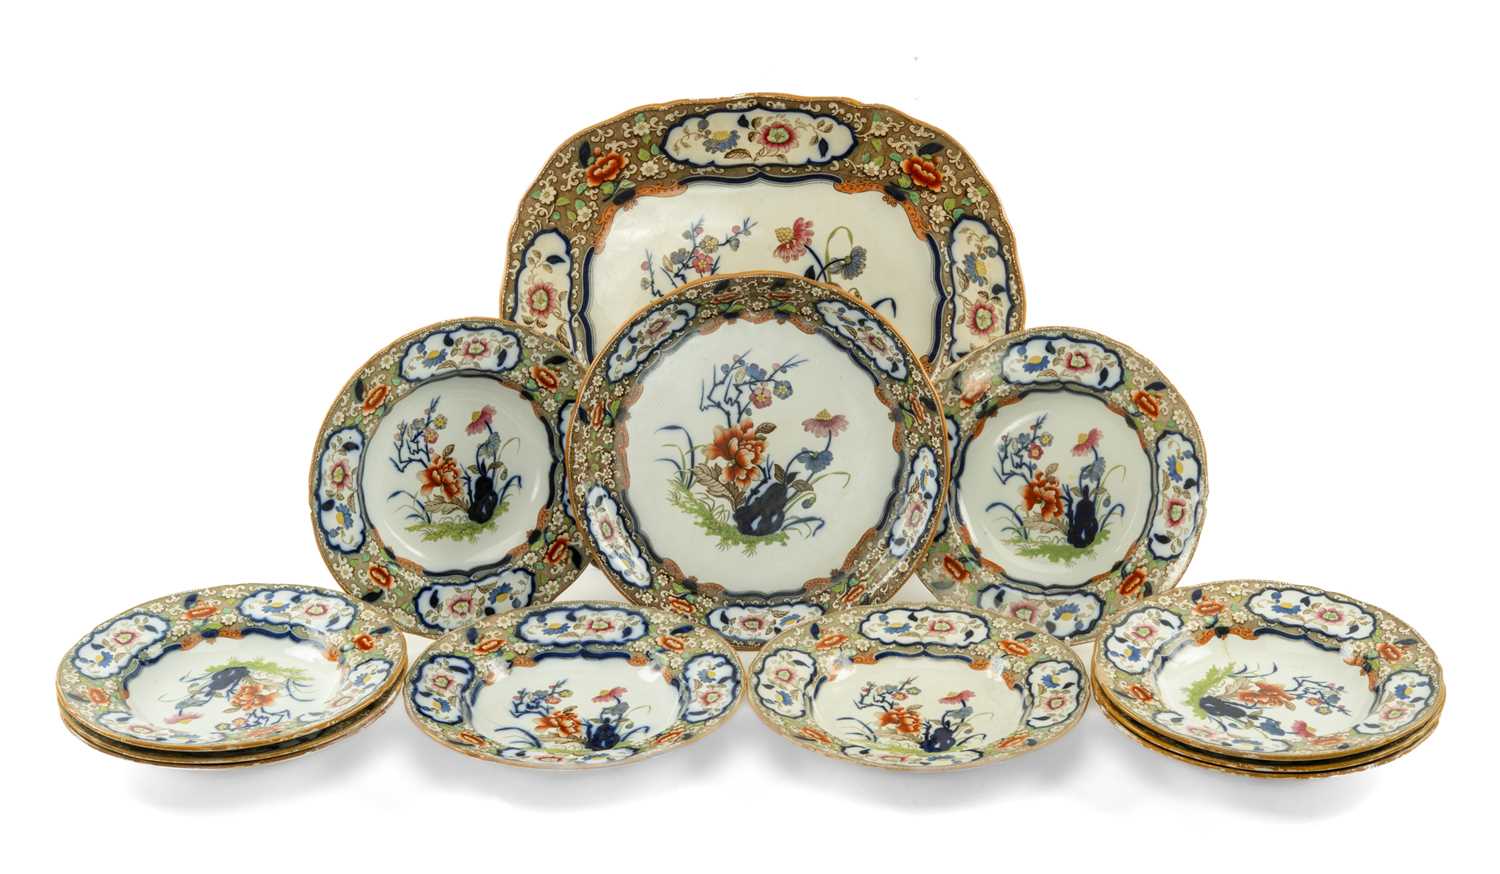 19TH C. MINTON & HOLLINS 'JAPANESE' PATTERN NEW STONE PART DINNER SERVICE, c. 1830, including oval